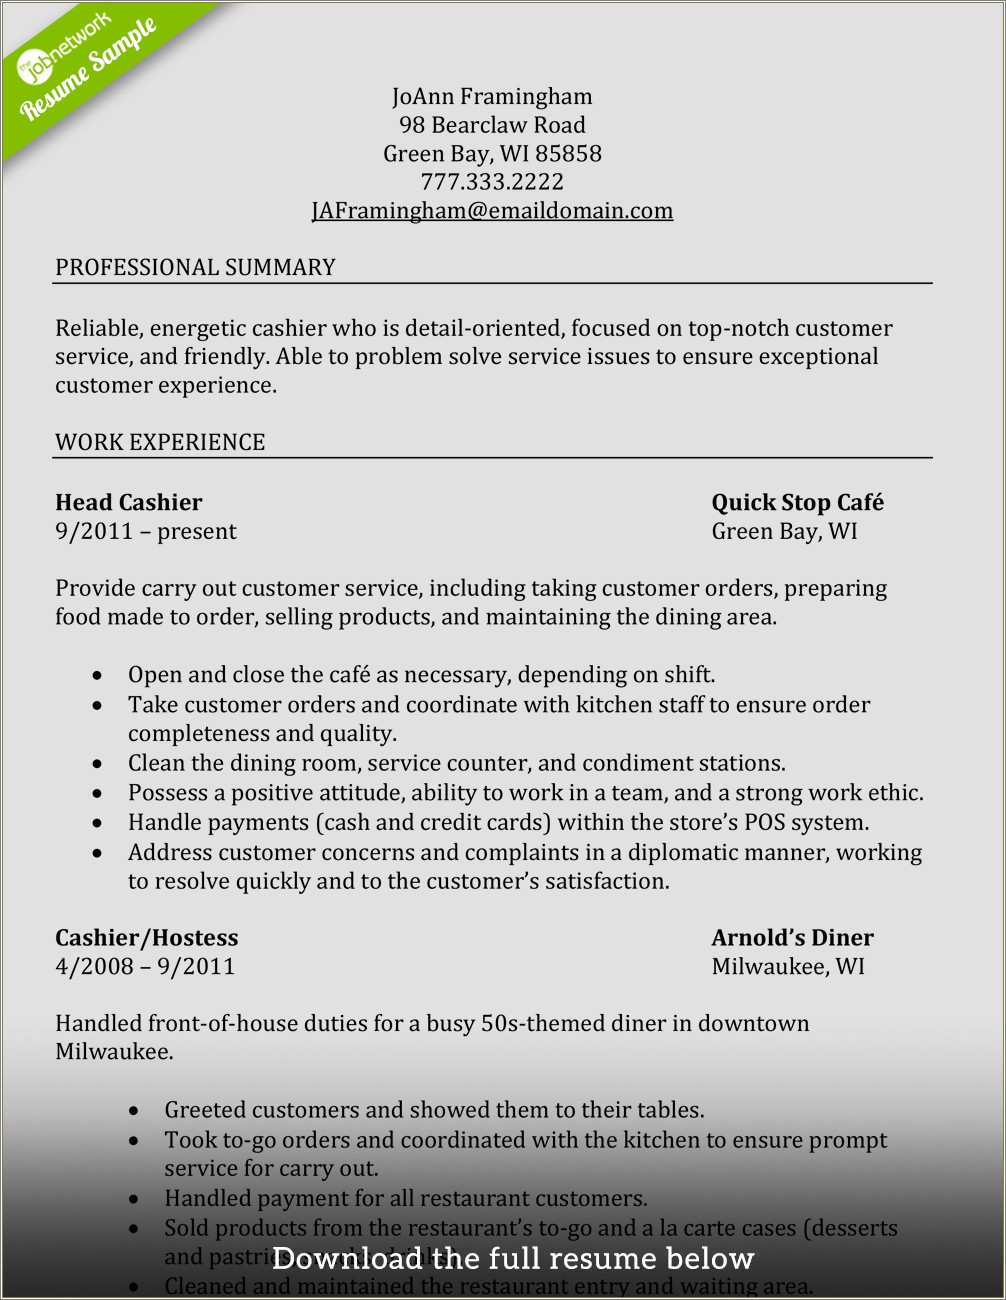 Professional Summary Resume Sample For Cashier